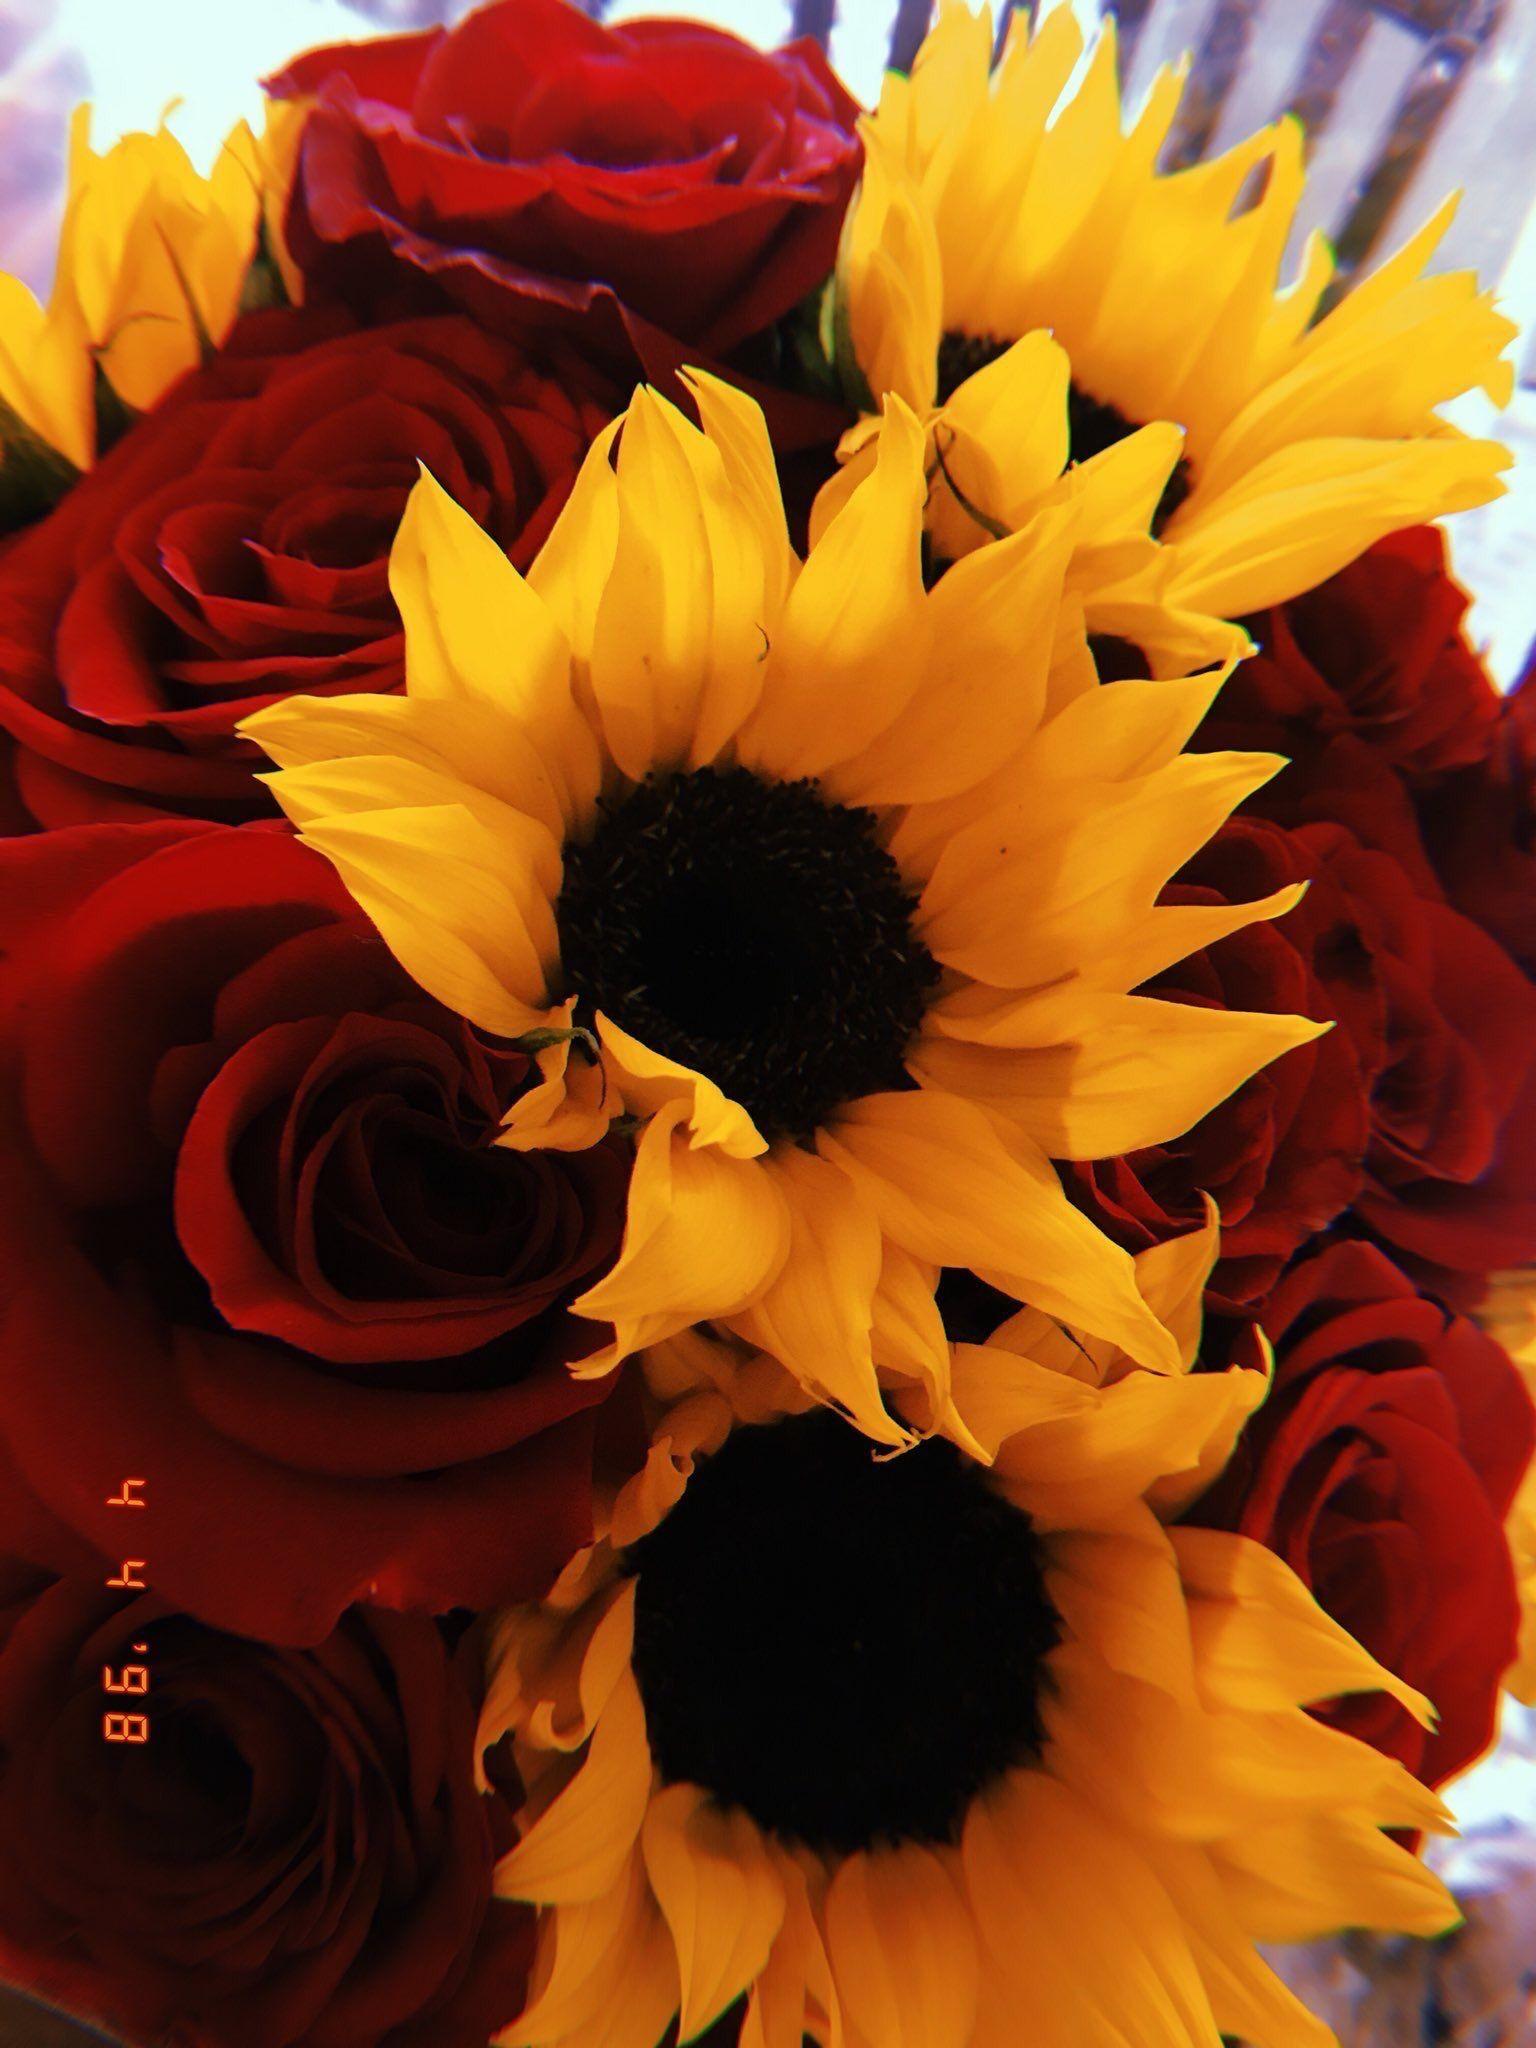 Download wallpaper 800x1420 roses sunflowers jasmine flowers bouquets  composition vase iphone se5s5c5 for parallax hd background